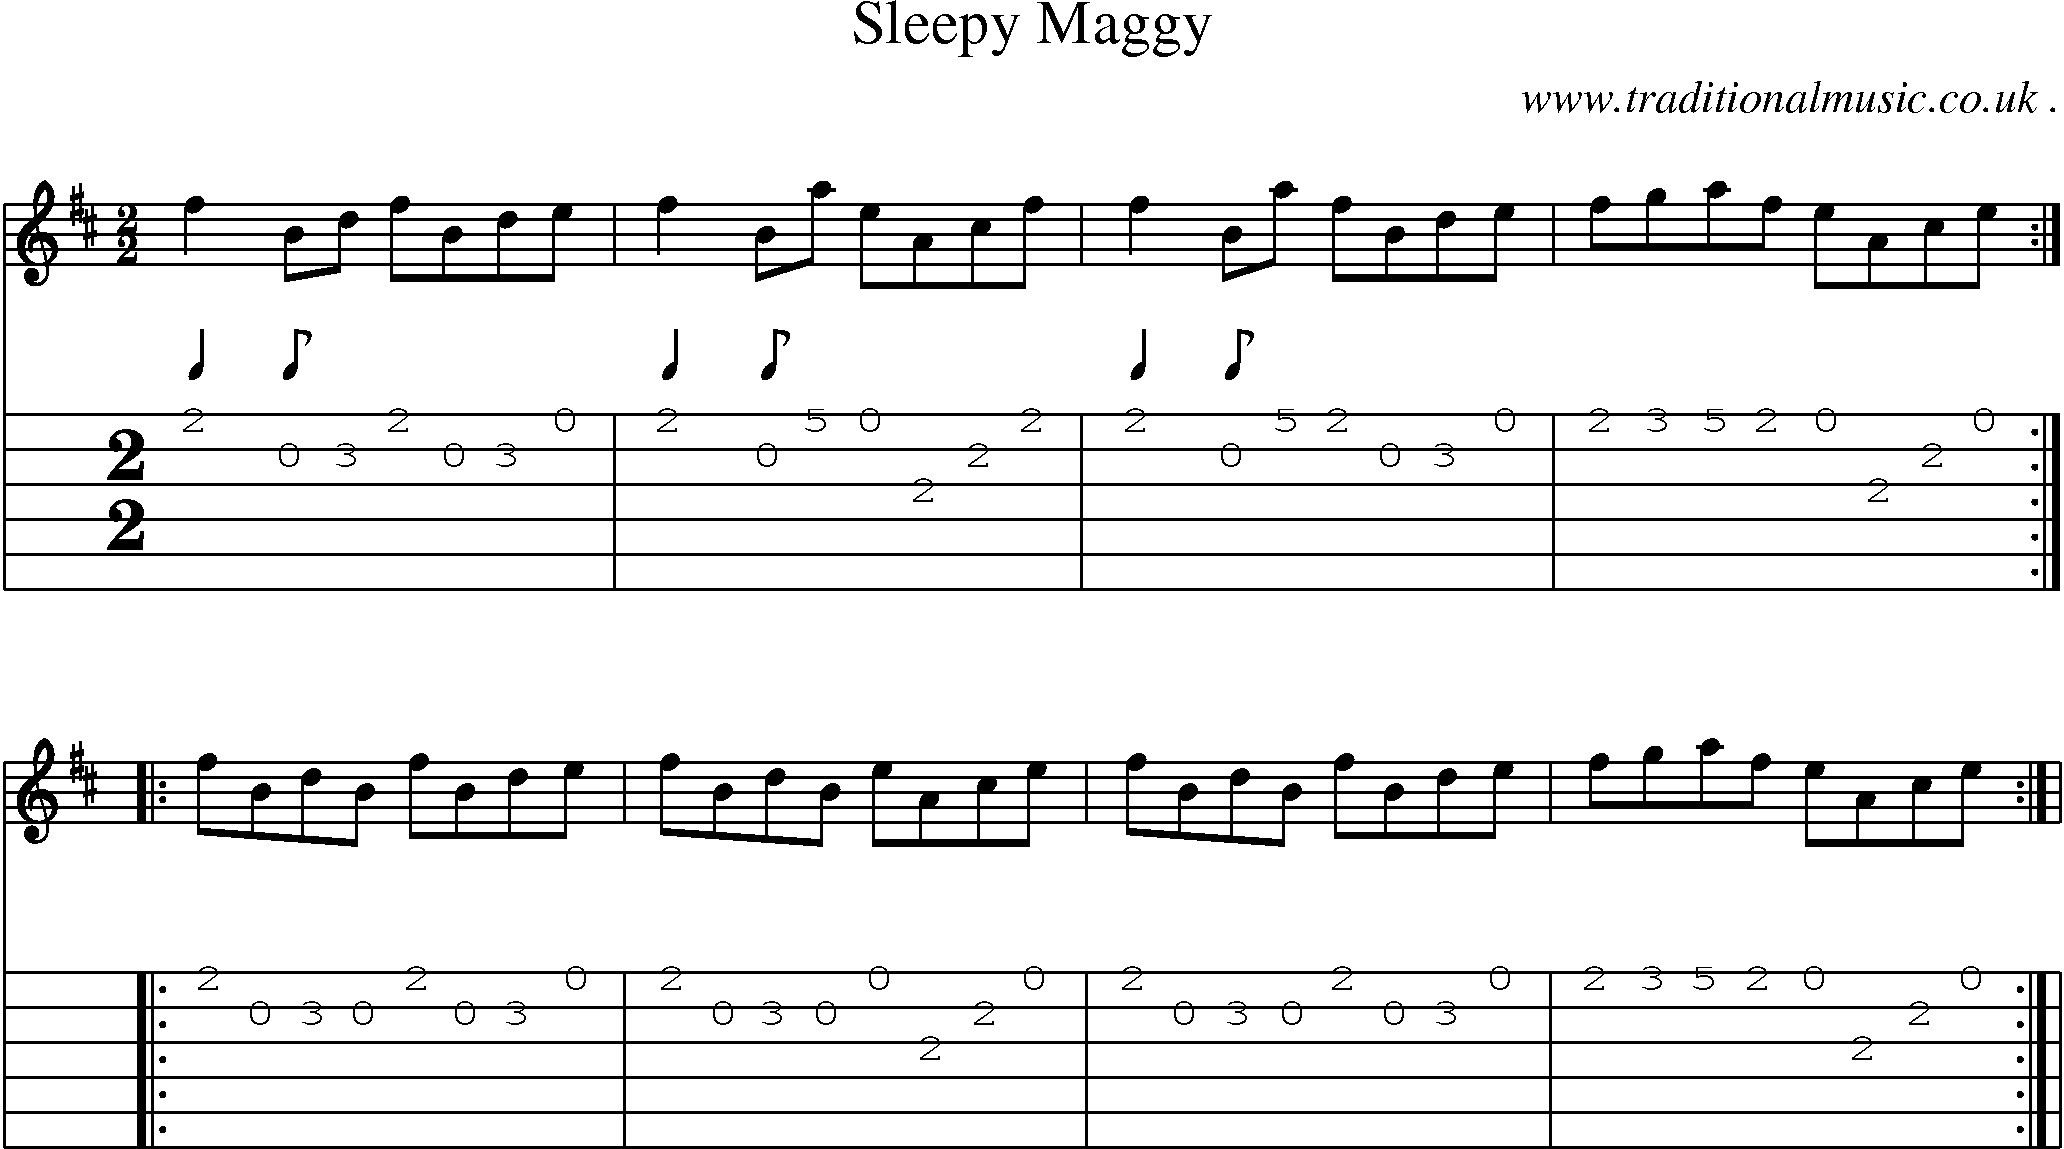 Sheet-Music and Guitar Tabs for Sleepy Maggy